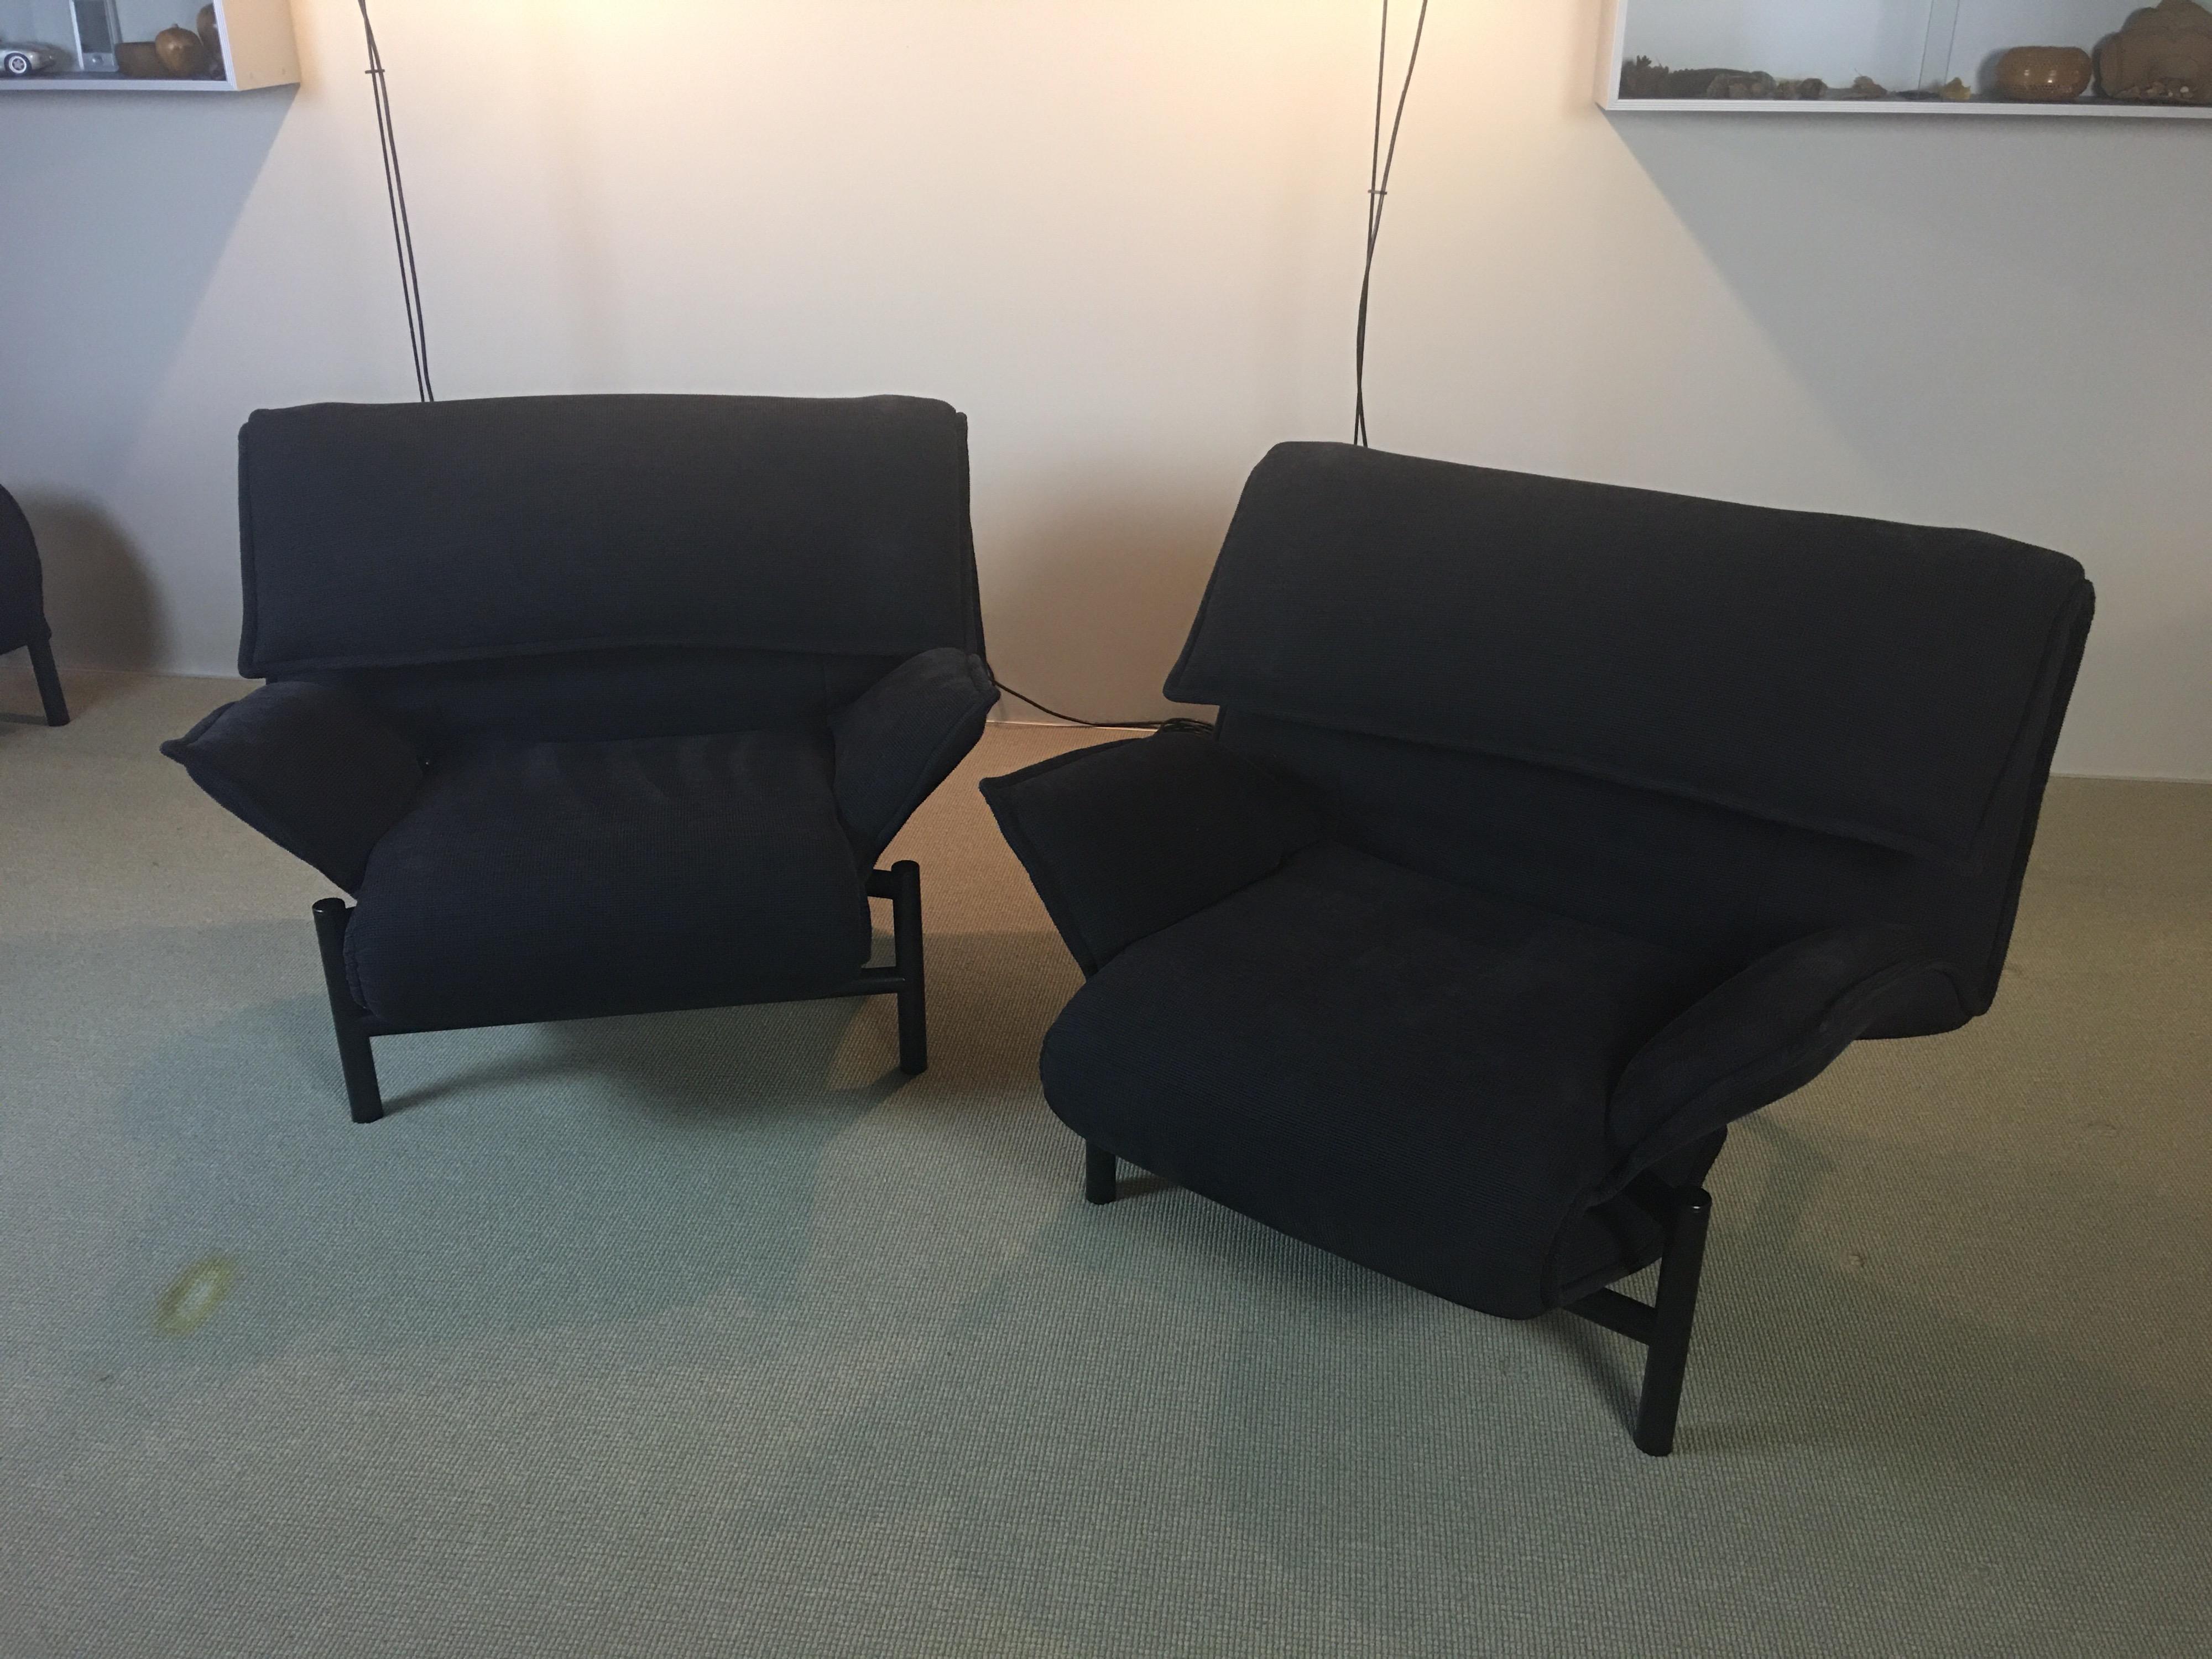 Pair of Veranda 123 adjustable lounge chairs designed by Vico Magistretti. Chairs have folding backs and adjustable in 3 different positions. Polyurethane foam over steel construction with frame and legs in matte black enameled steel. Design dates